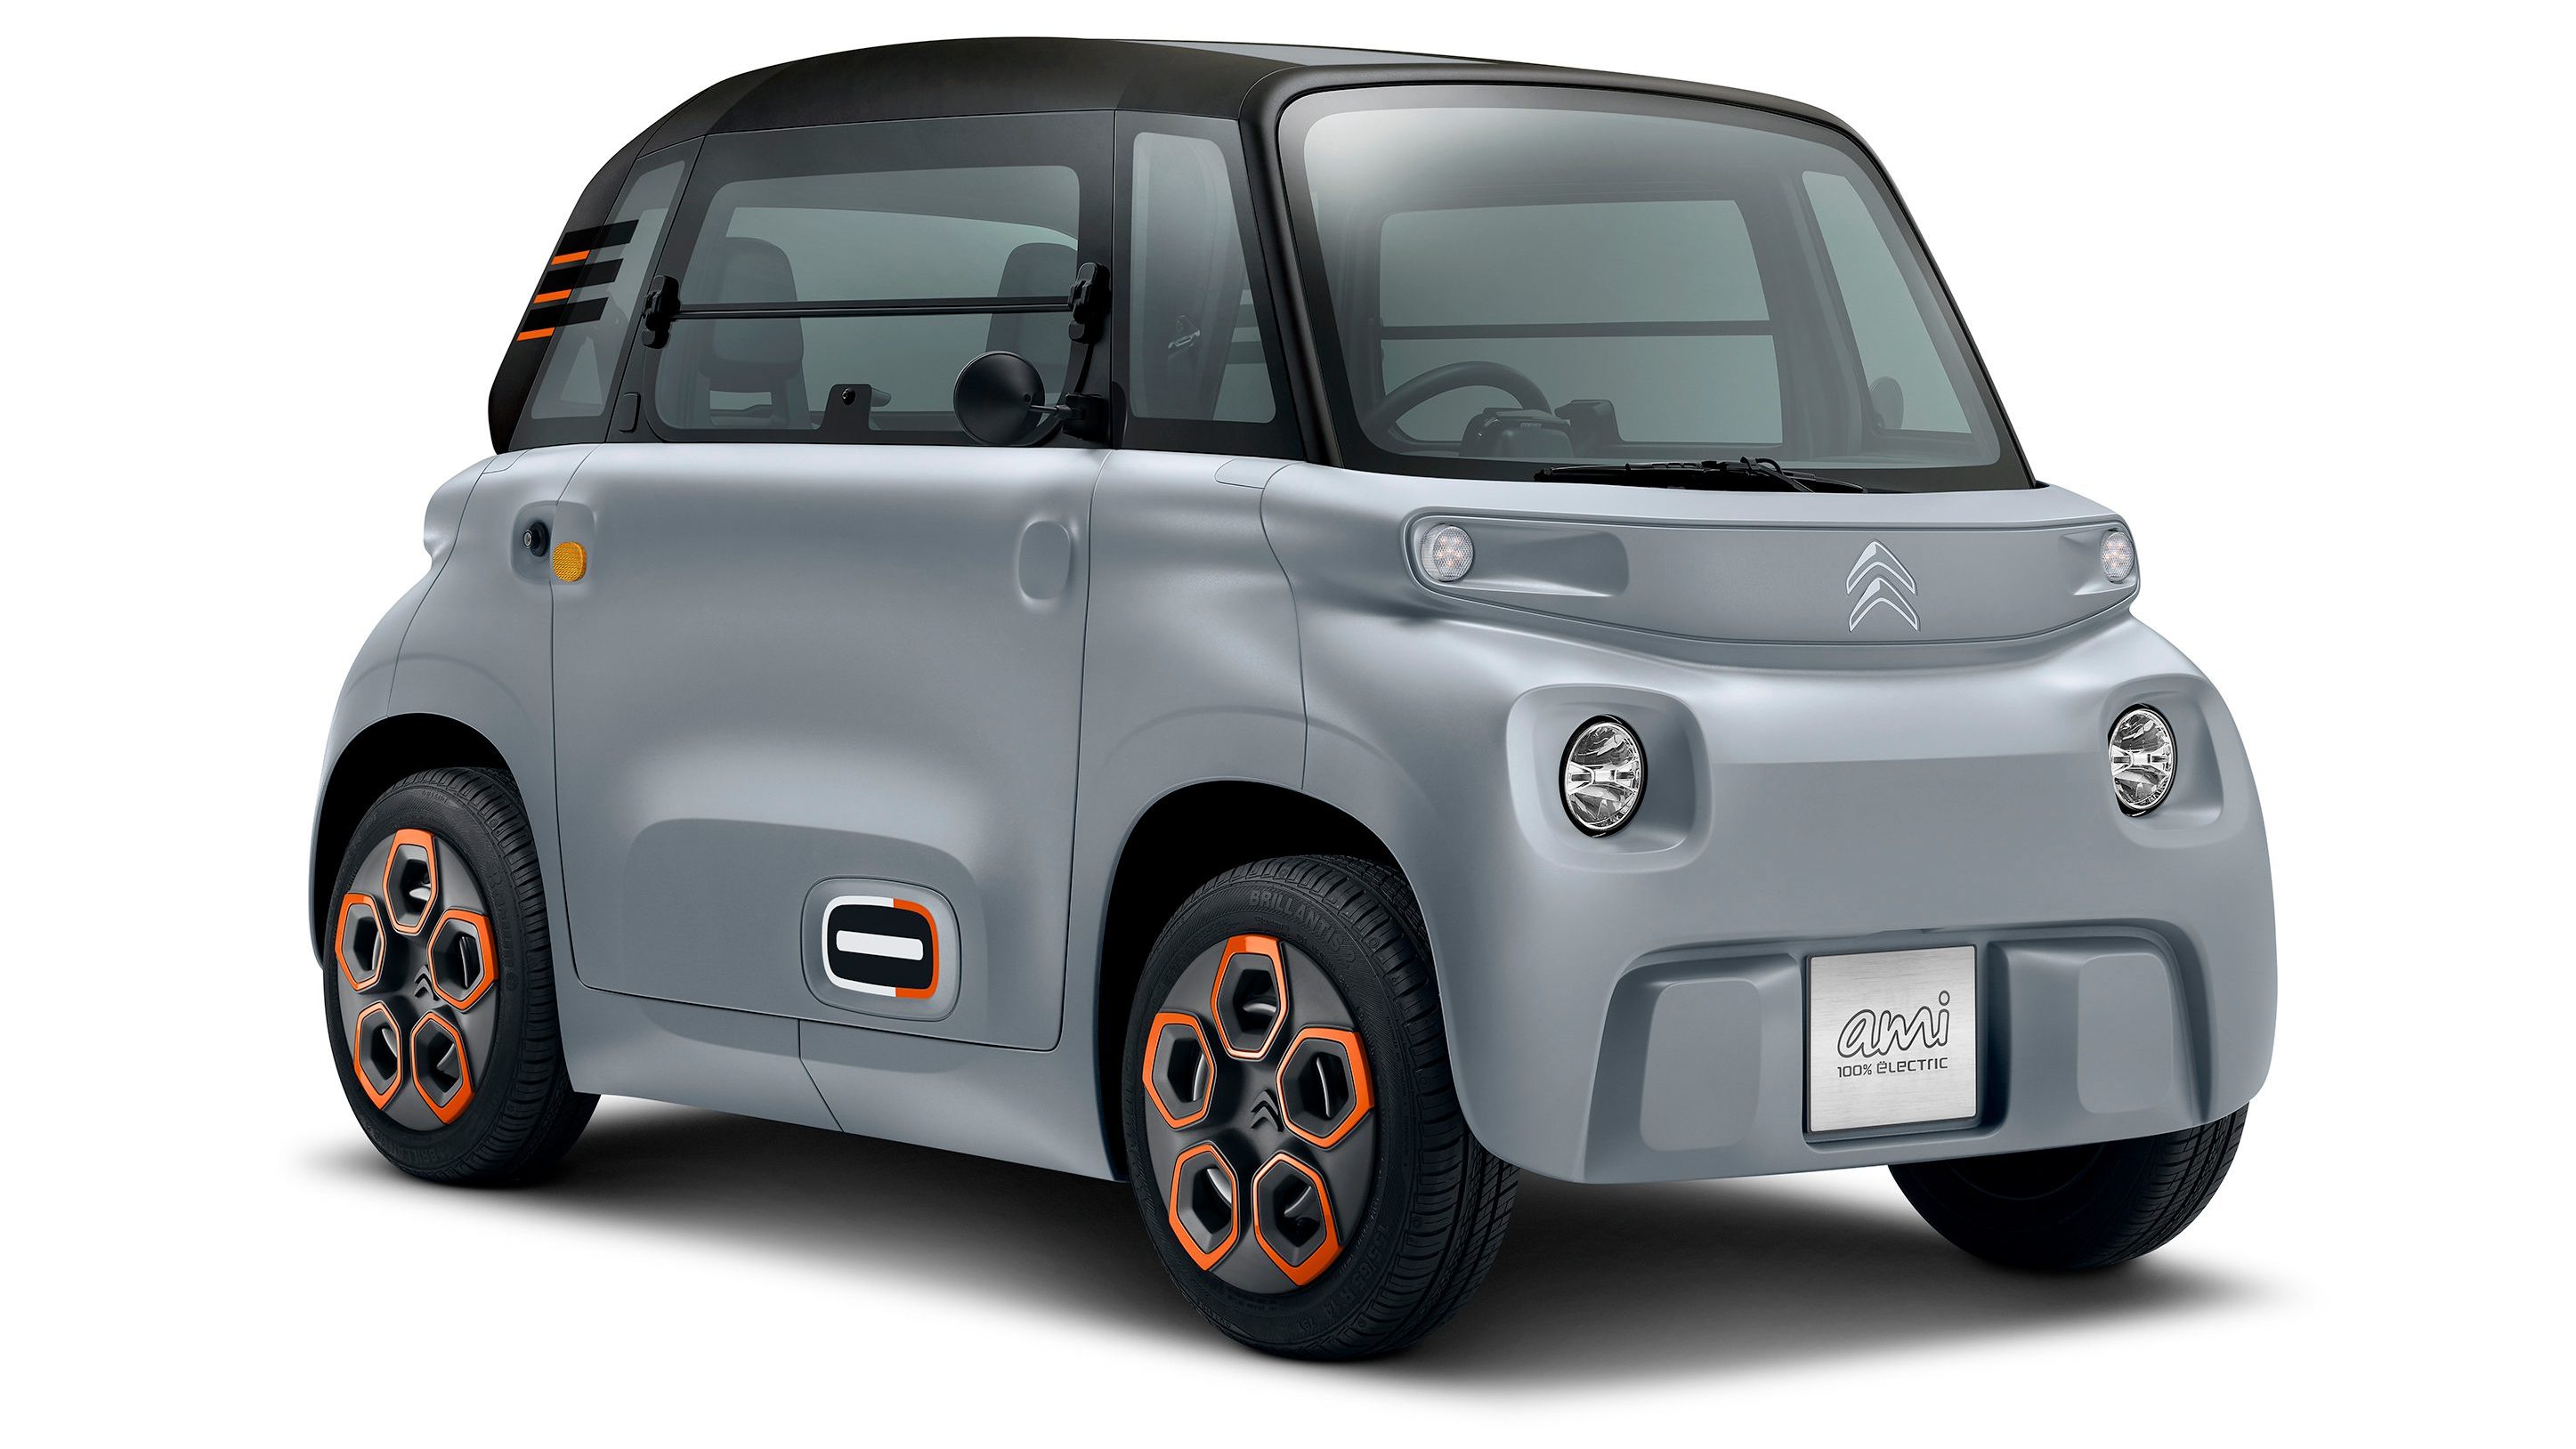 Meet the Toyota C+pod, a tiny electric car that's big in Japan